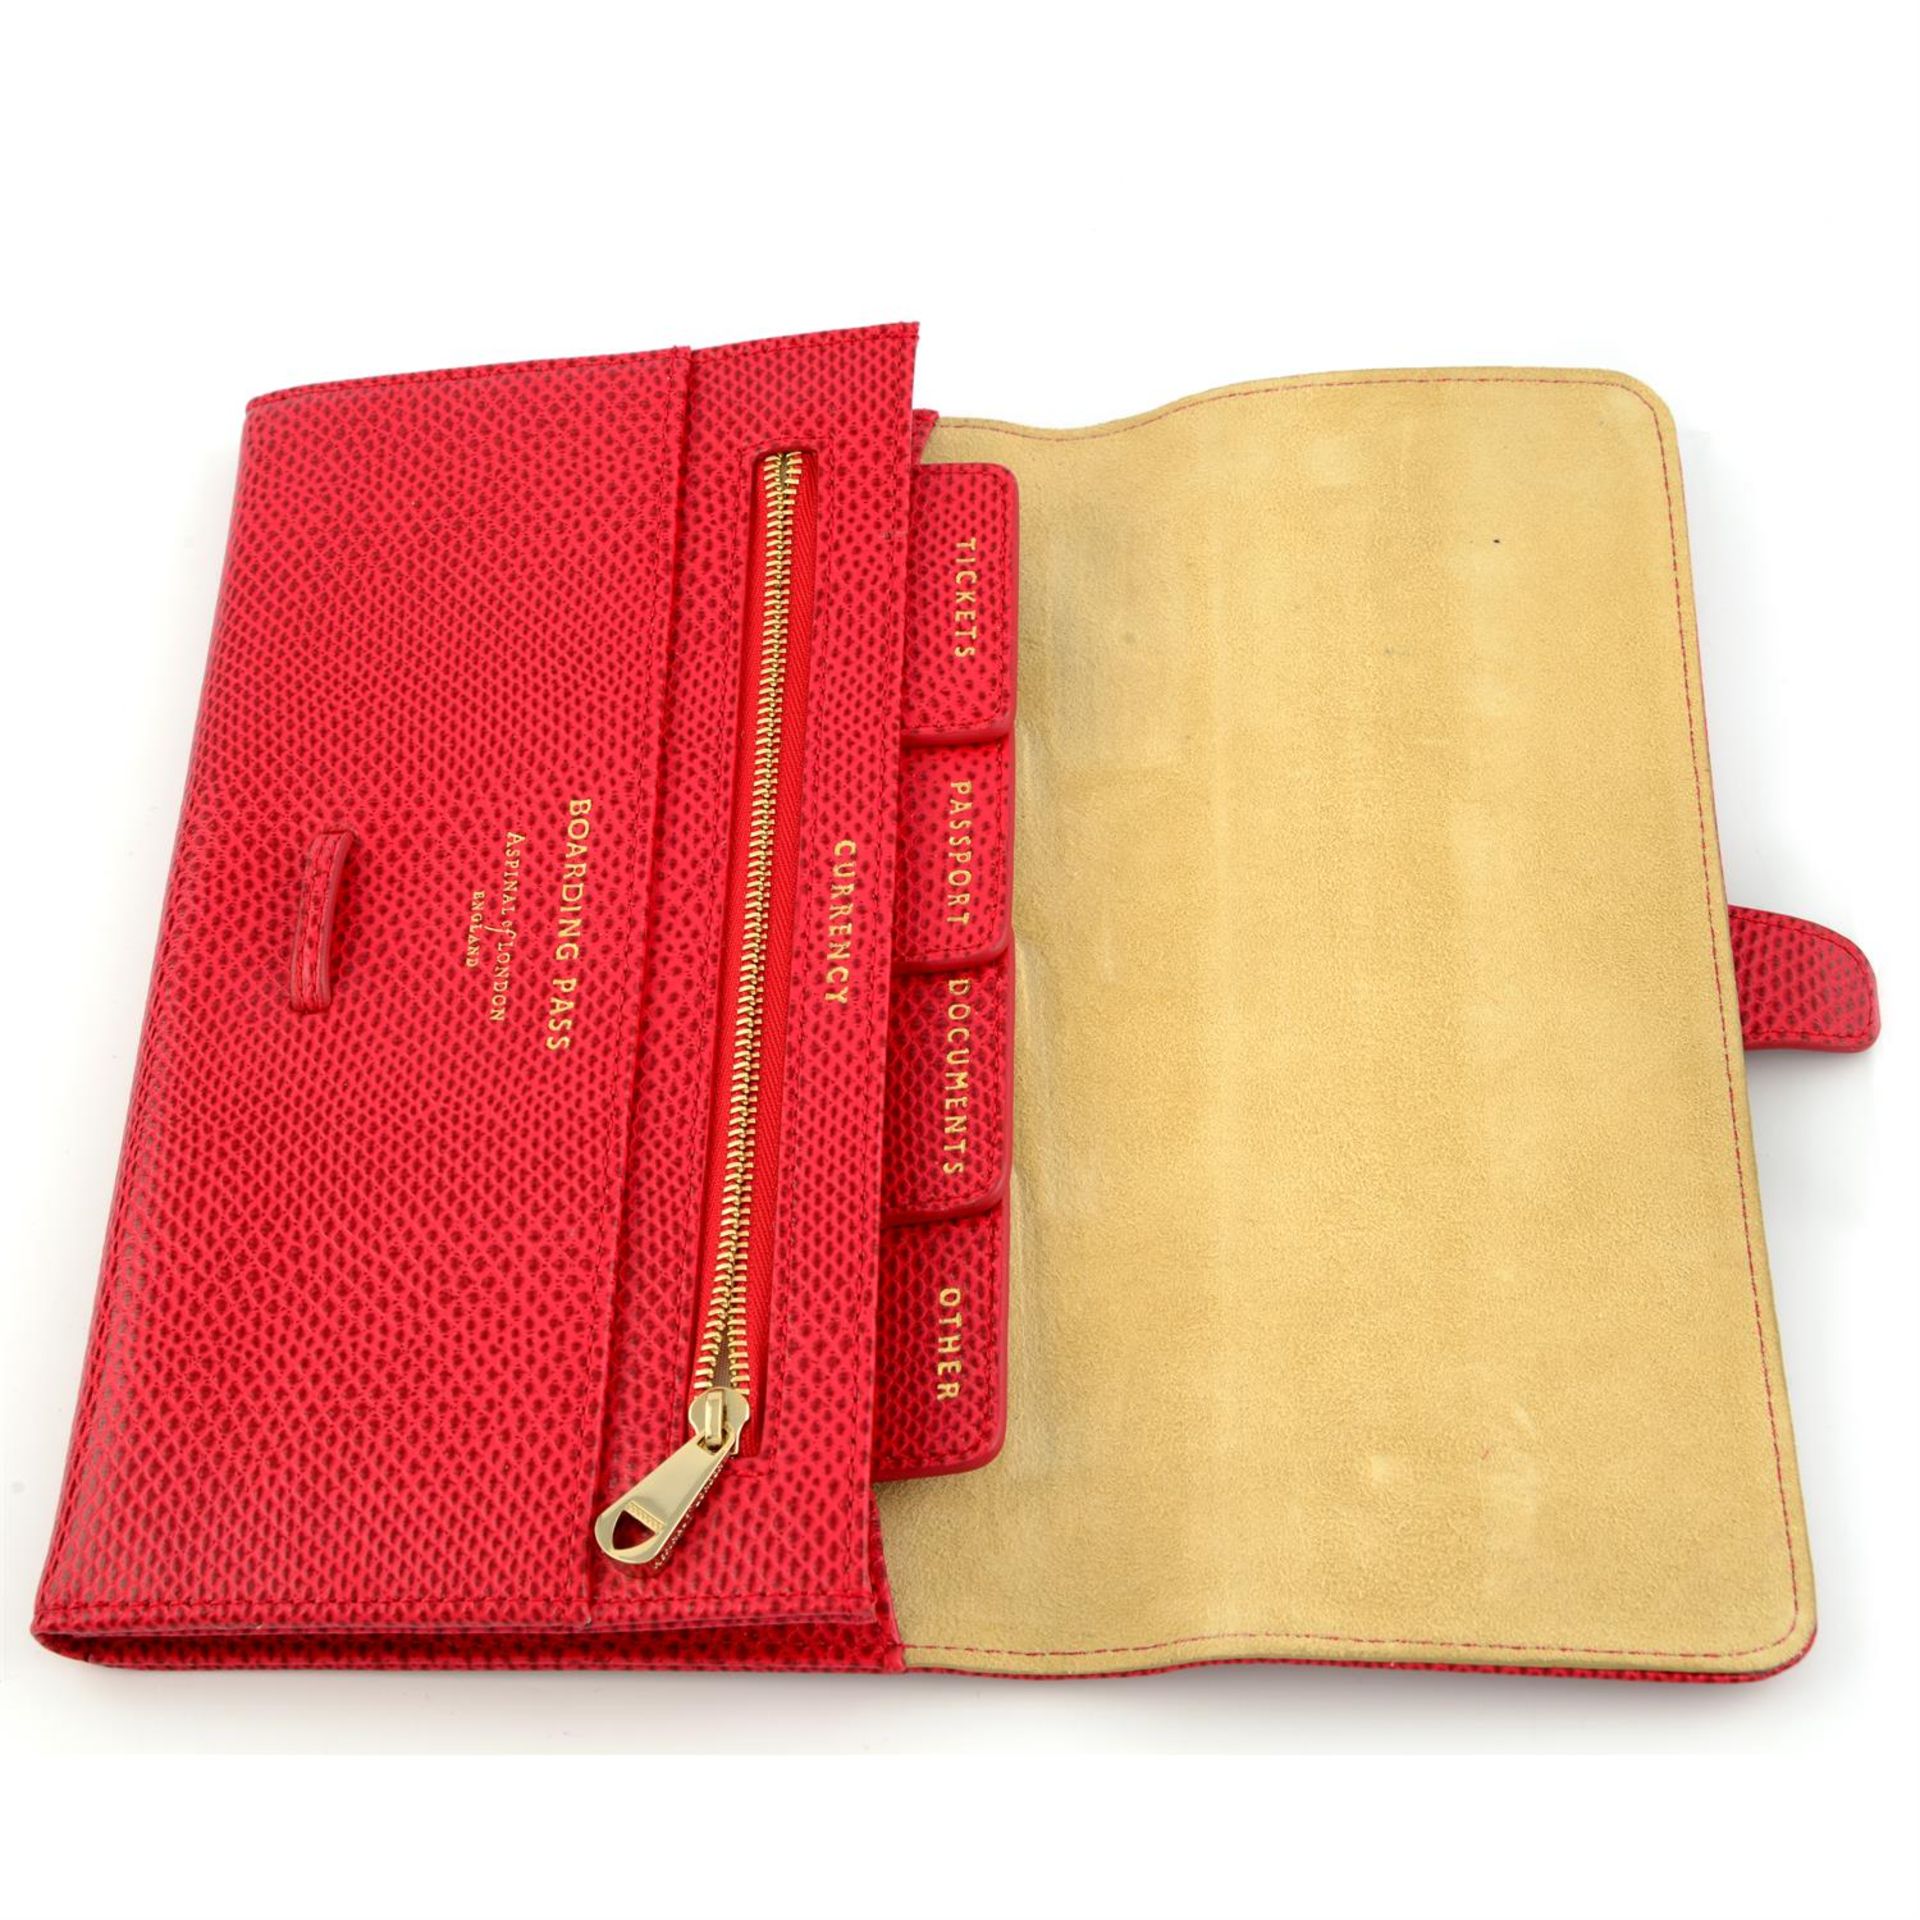 ASPINAL OF LONDON - a red embossed leather document holder. - Image 3 of 3